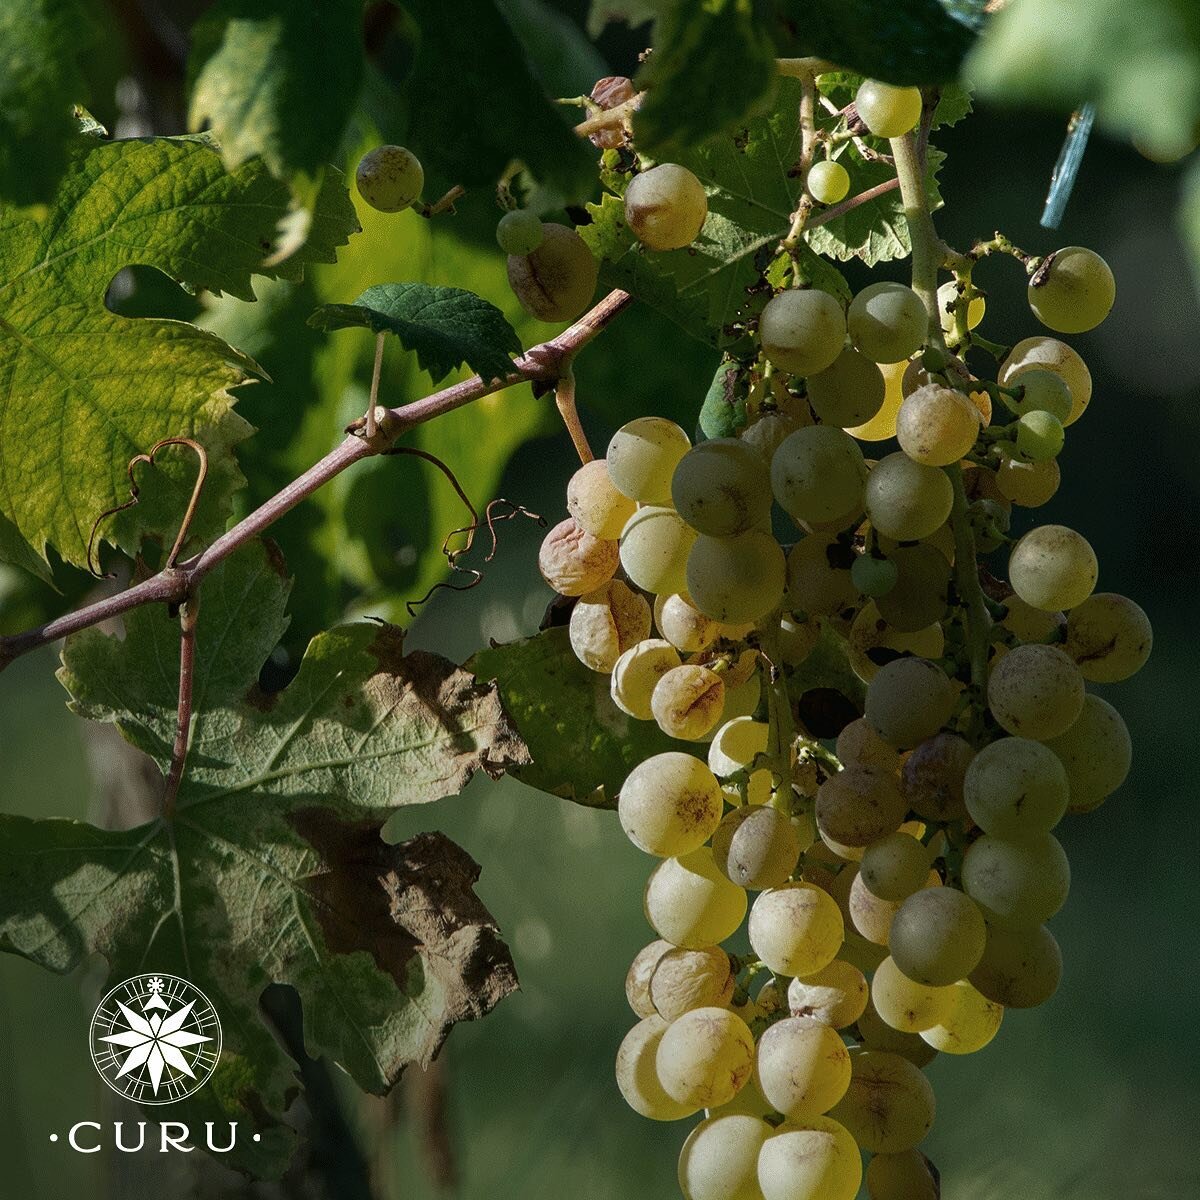 Did you know our Pisco are made with different kind of Muscat? Curu has a variety of hand-picked Alexandria Muscat, Pink Muscat and Austria Muscat Grapes 

#Curu #Pisco #Premium #ChileanPisco #PiscoLovers #PiscoCocktails #PiscoArtesanal #PiscoChileno